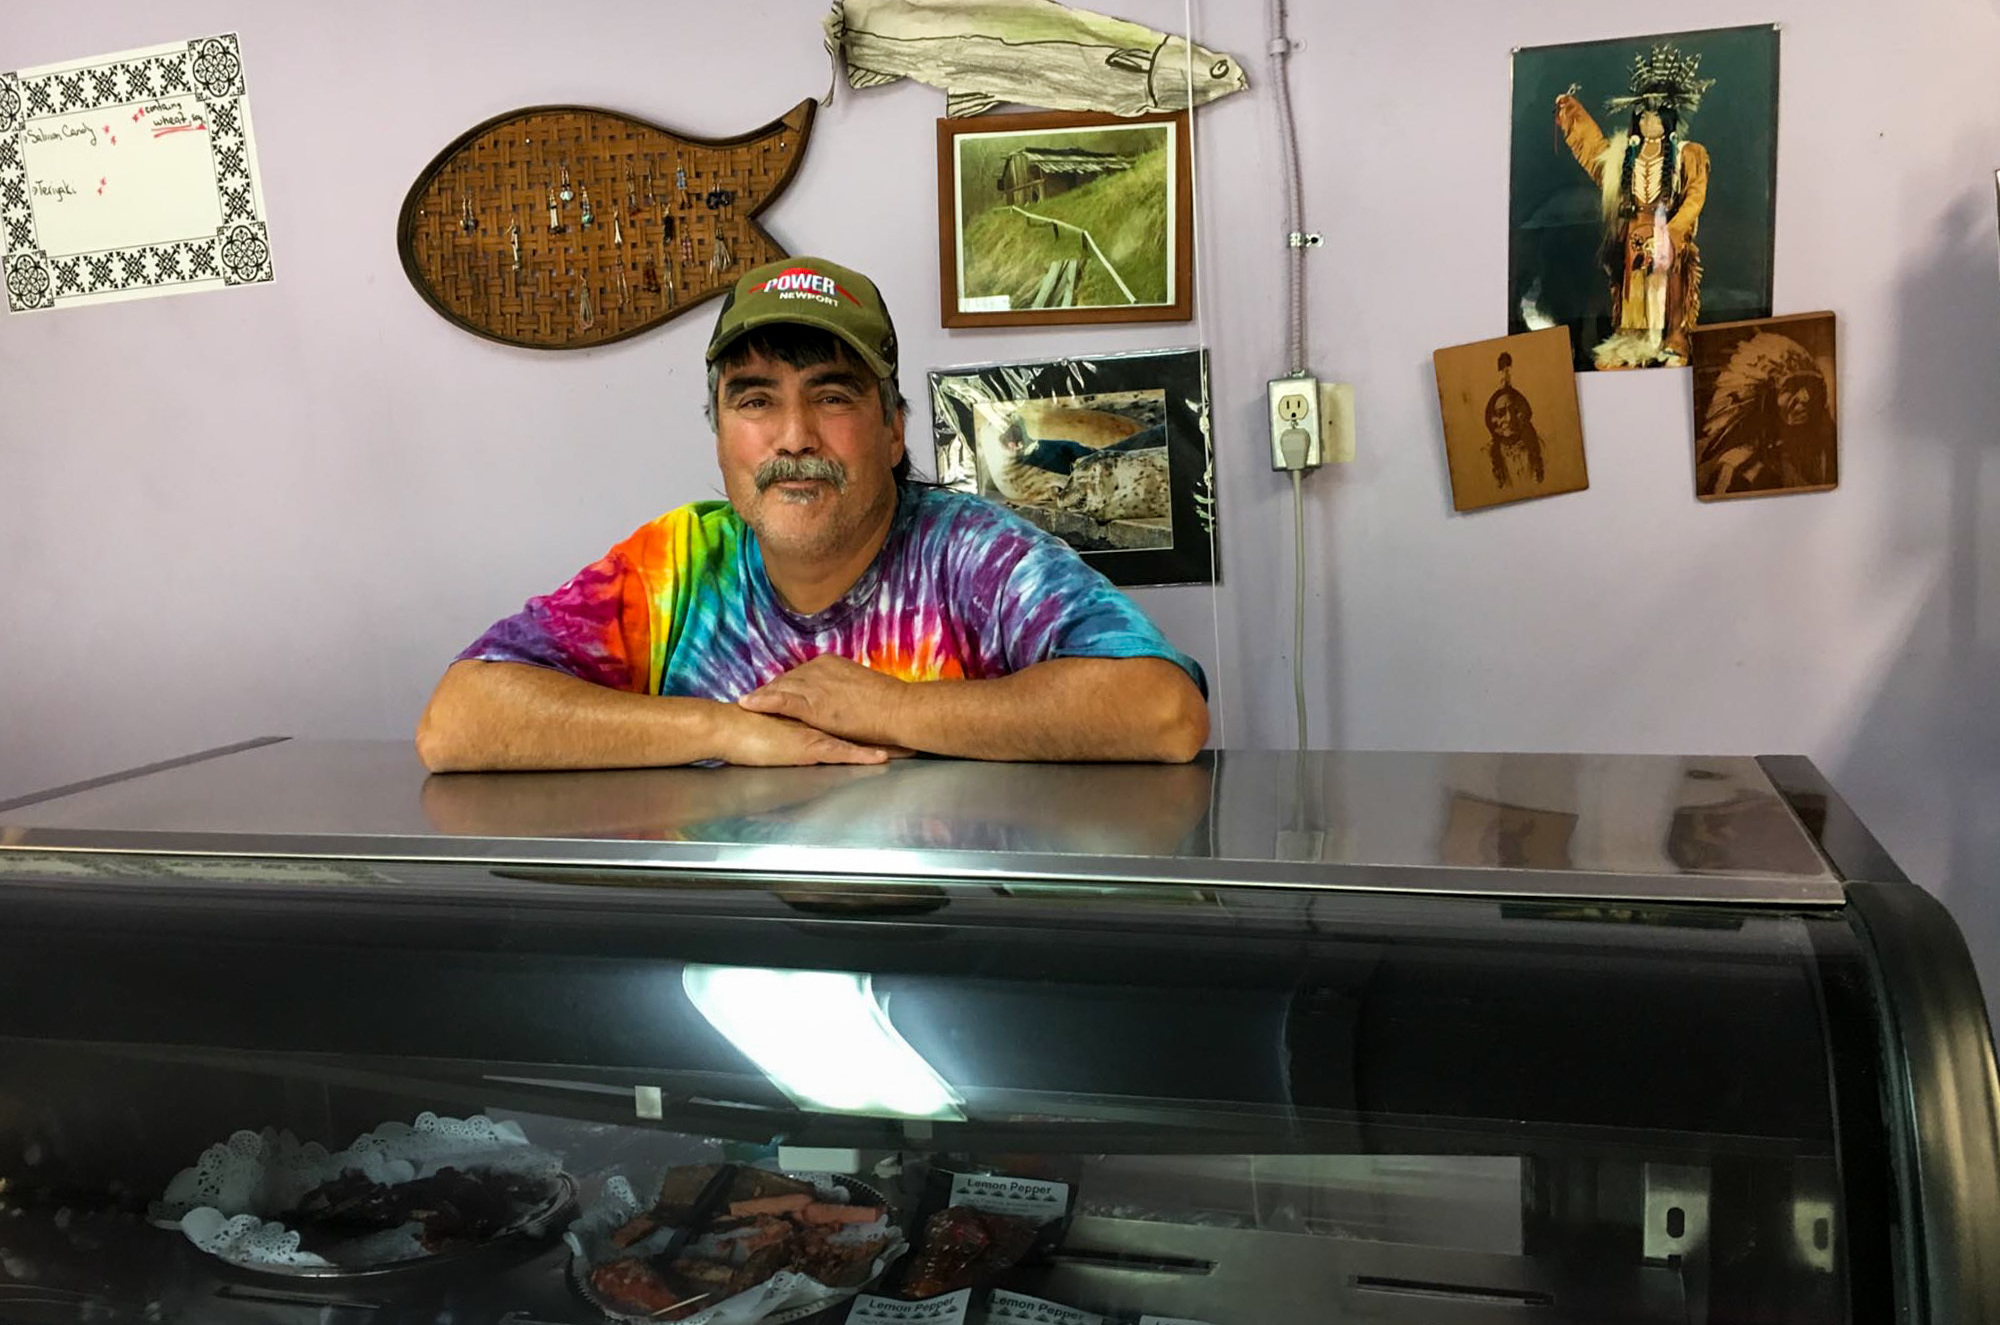 Paul Mattz Van Mechelen, who runs Paul's Famous Smoked Salmon, has had to buy salmon from fishermen hundreds of miles away instead of fishing for Chinook in the Klamath River, just 50 feet from his California shop. (Photo by Lisa Morehouse/KQED)